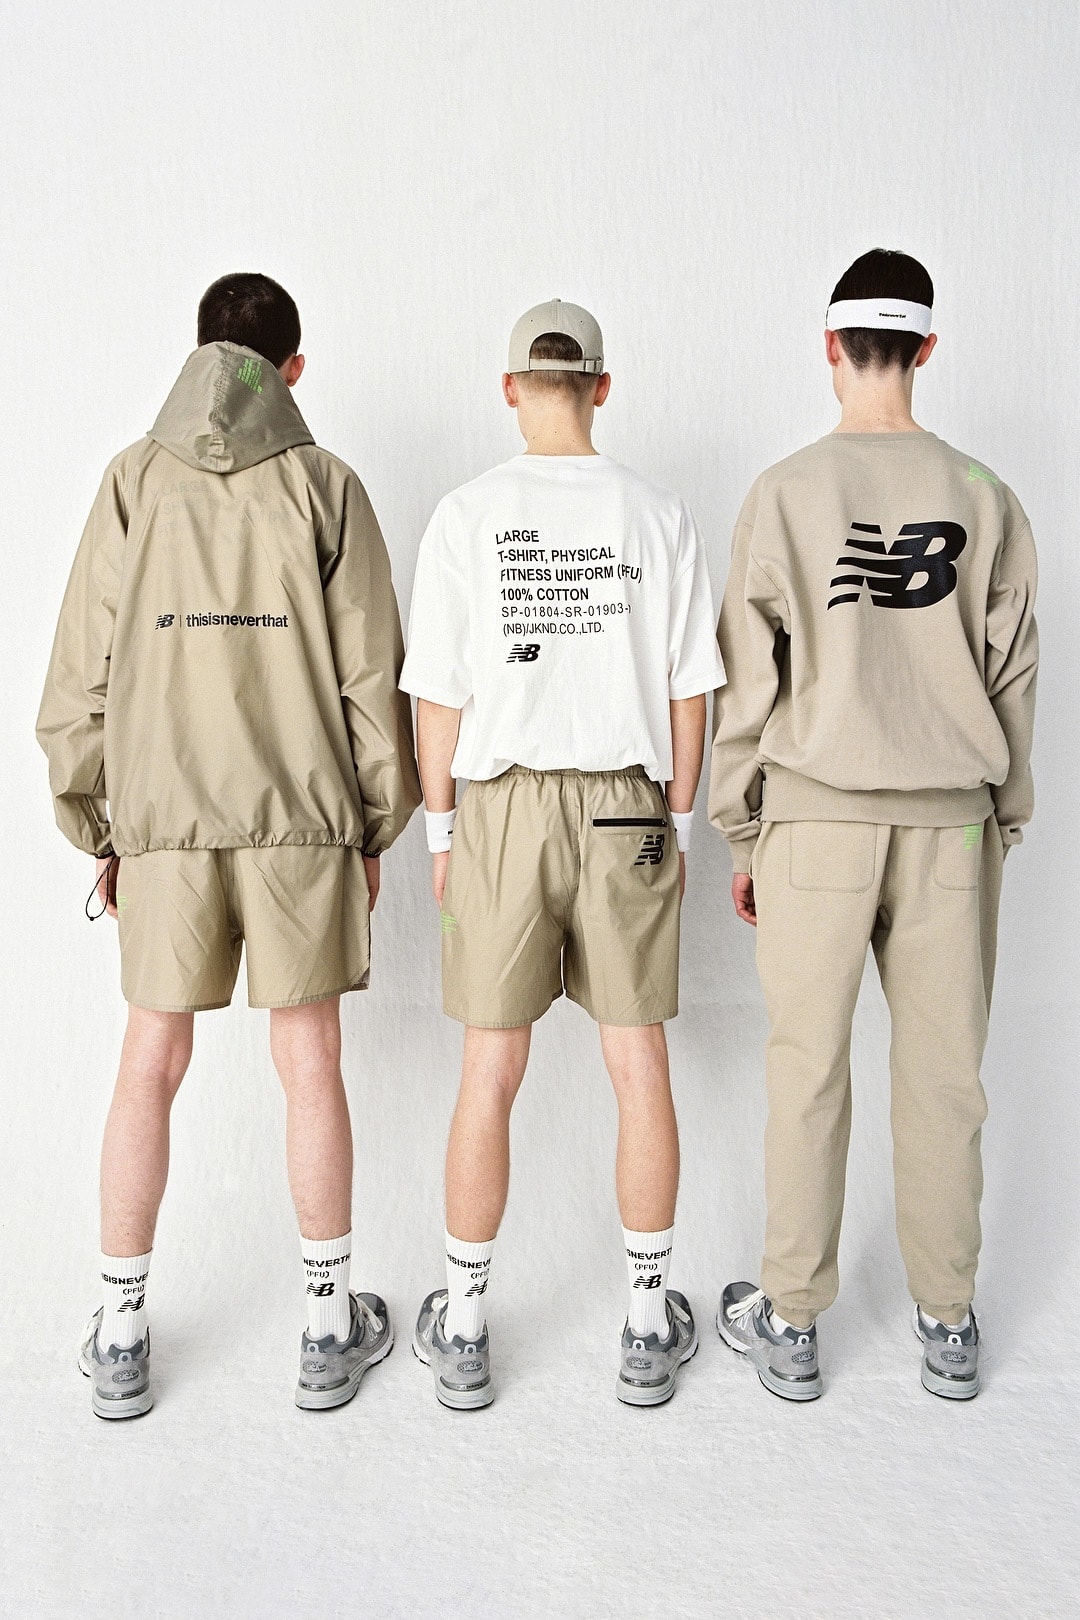 New Balance x thisisneverthat PFU Physical Fitness Uniform Drop Spring Summer 2019 SS19 Collection Collaboration March 8 Release 